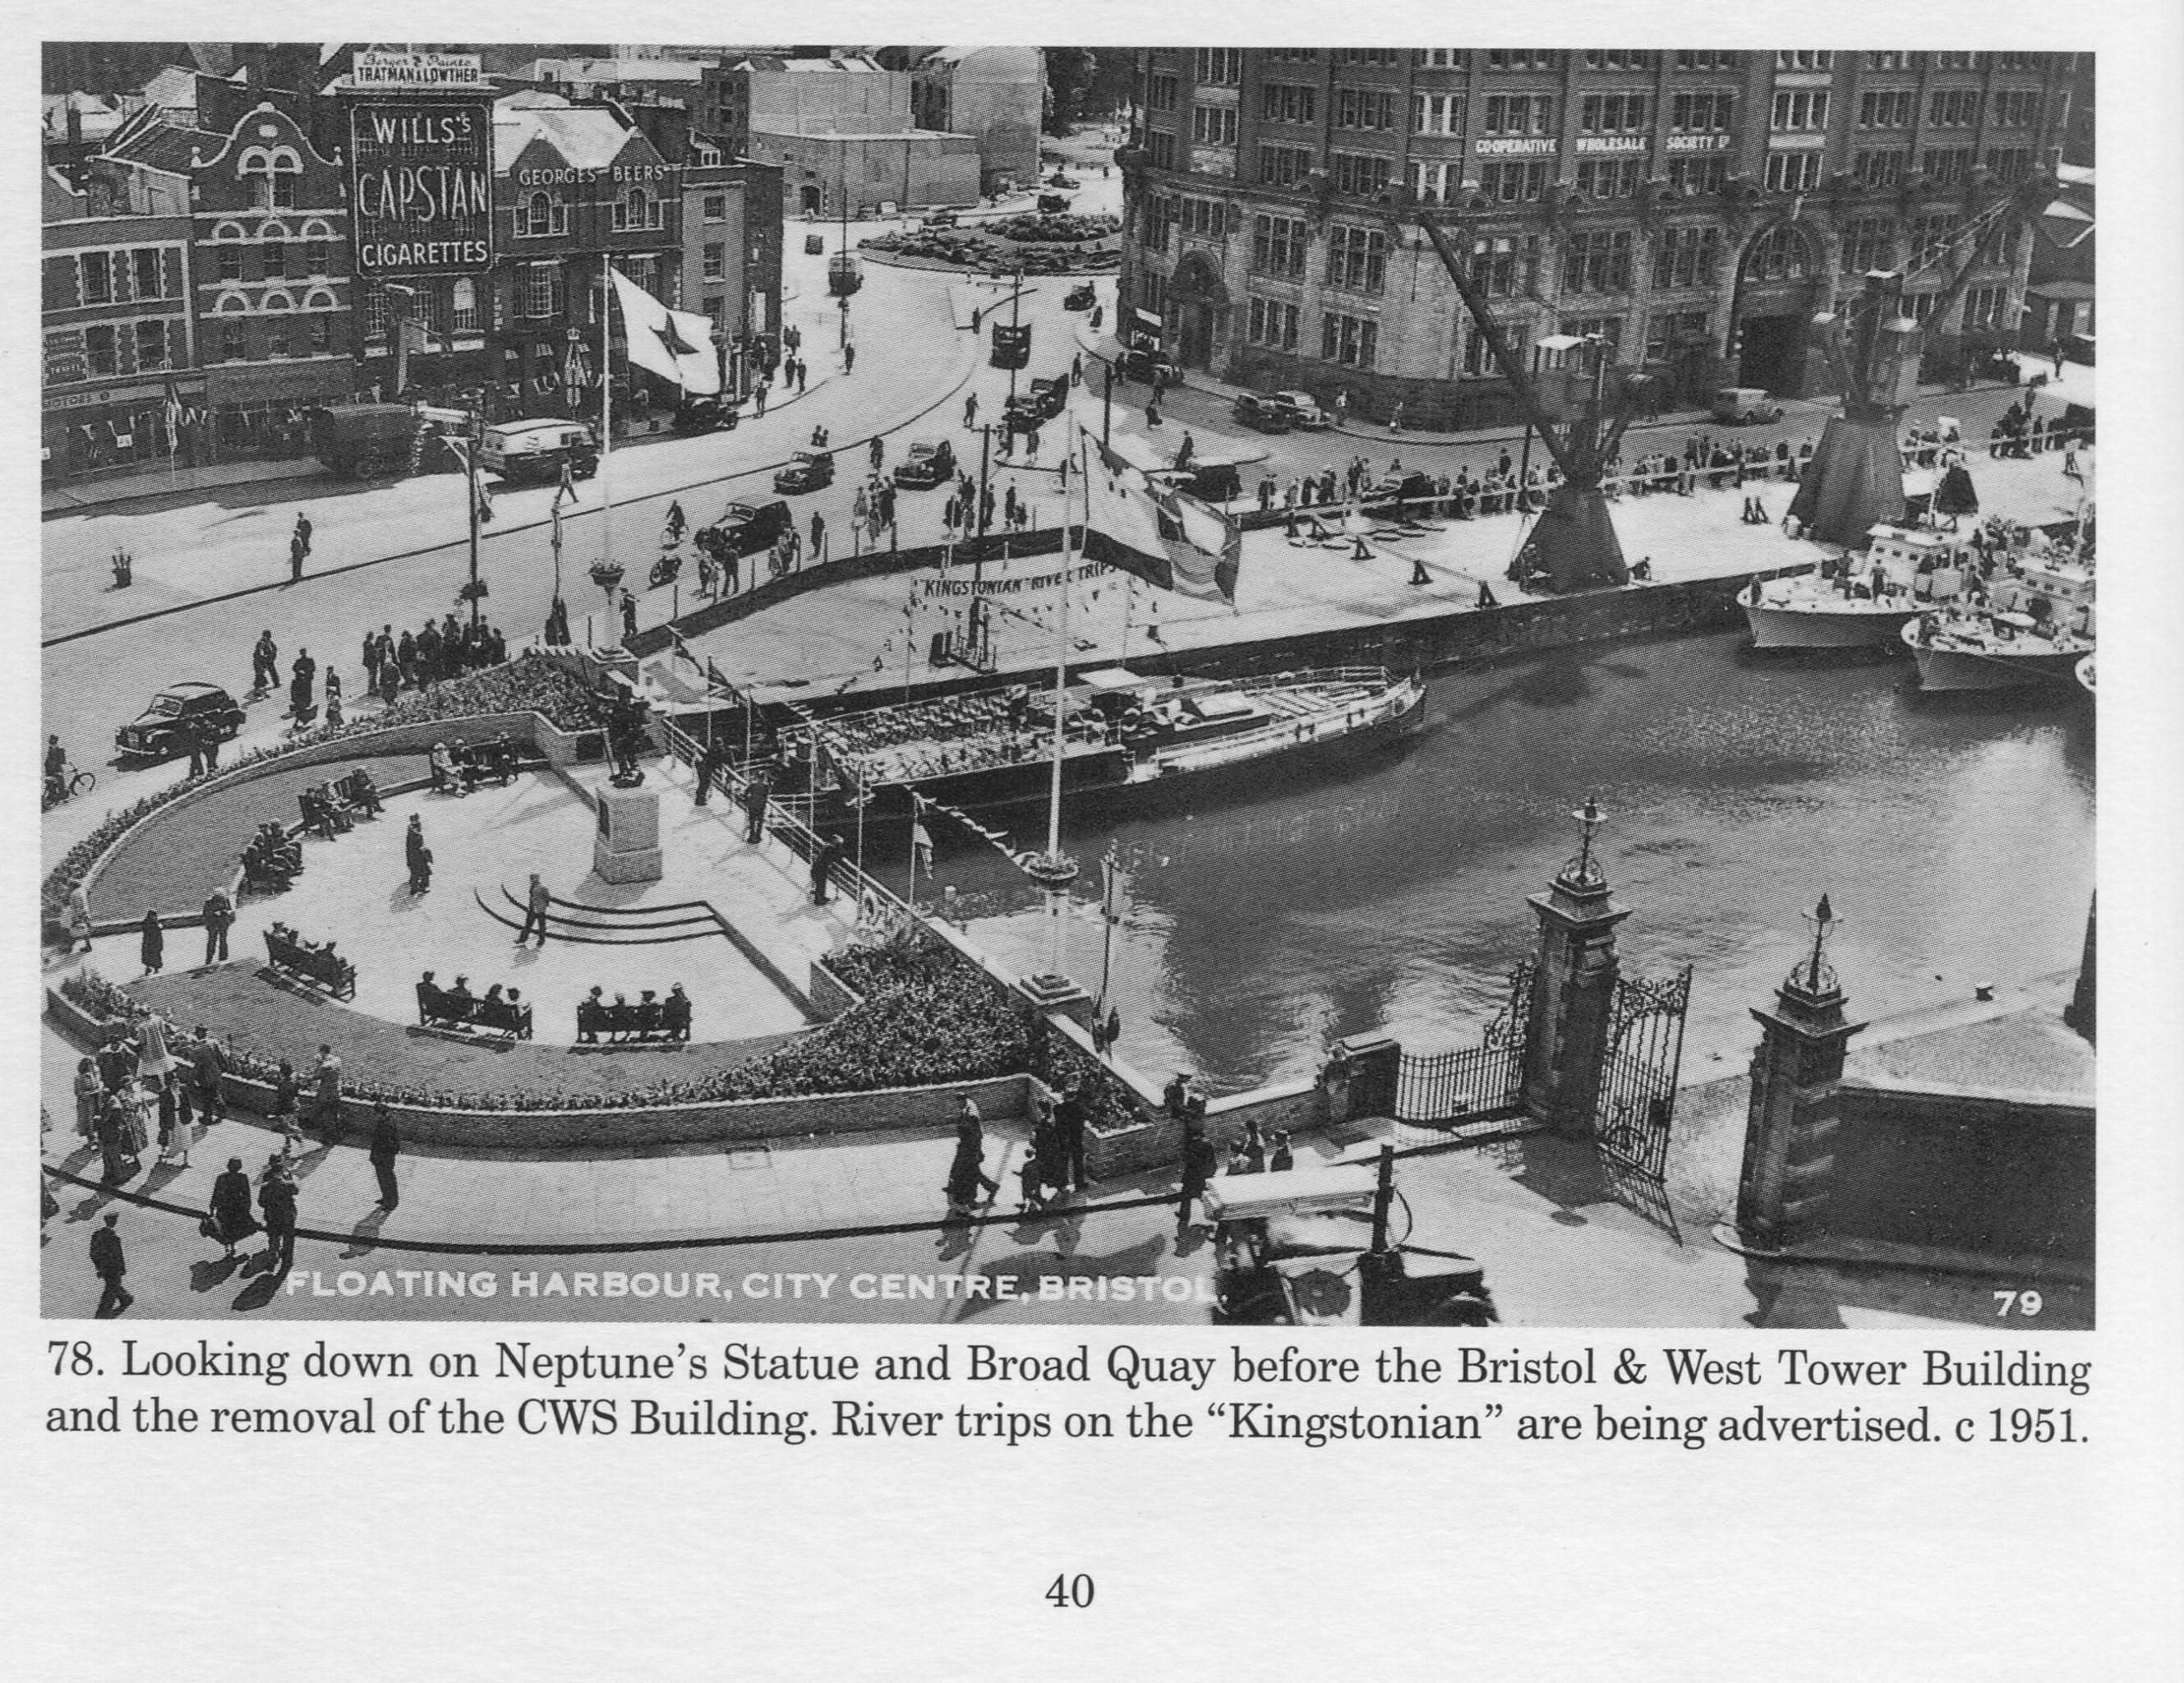 1951 Centre and St Augustine's Quay
Photo taken from the book Bygone Bristol: Hotwells and the City Docks, by Janet and Derek Fisher.

You can see the gate from the previous photo at...